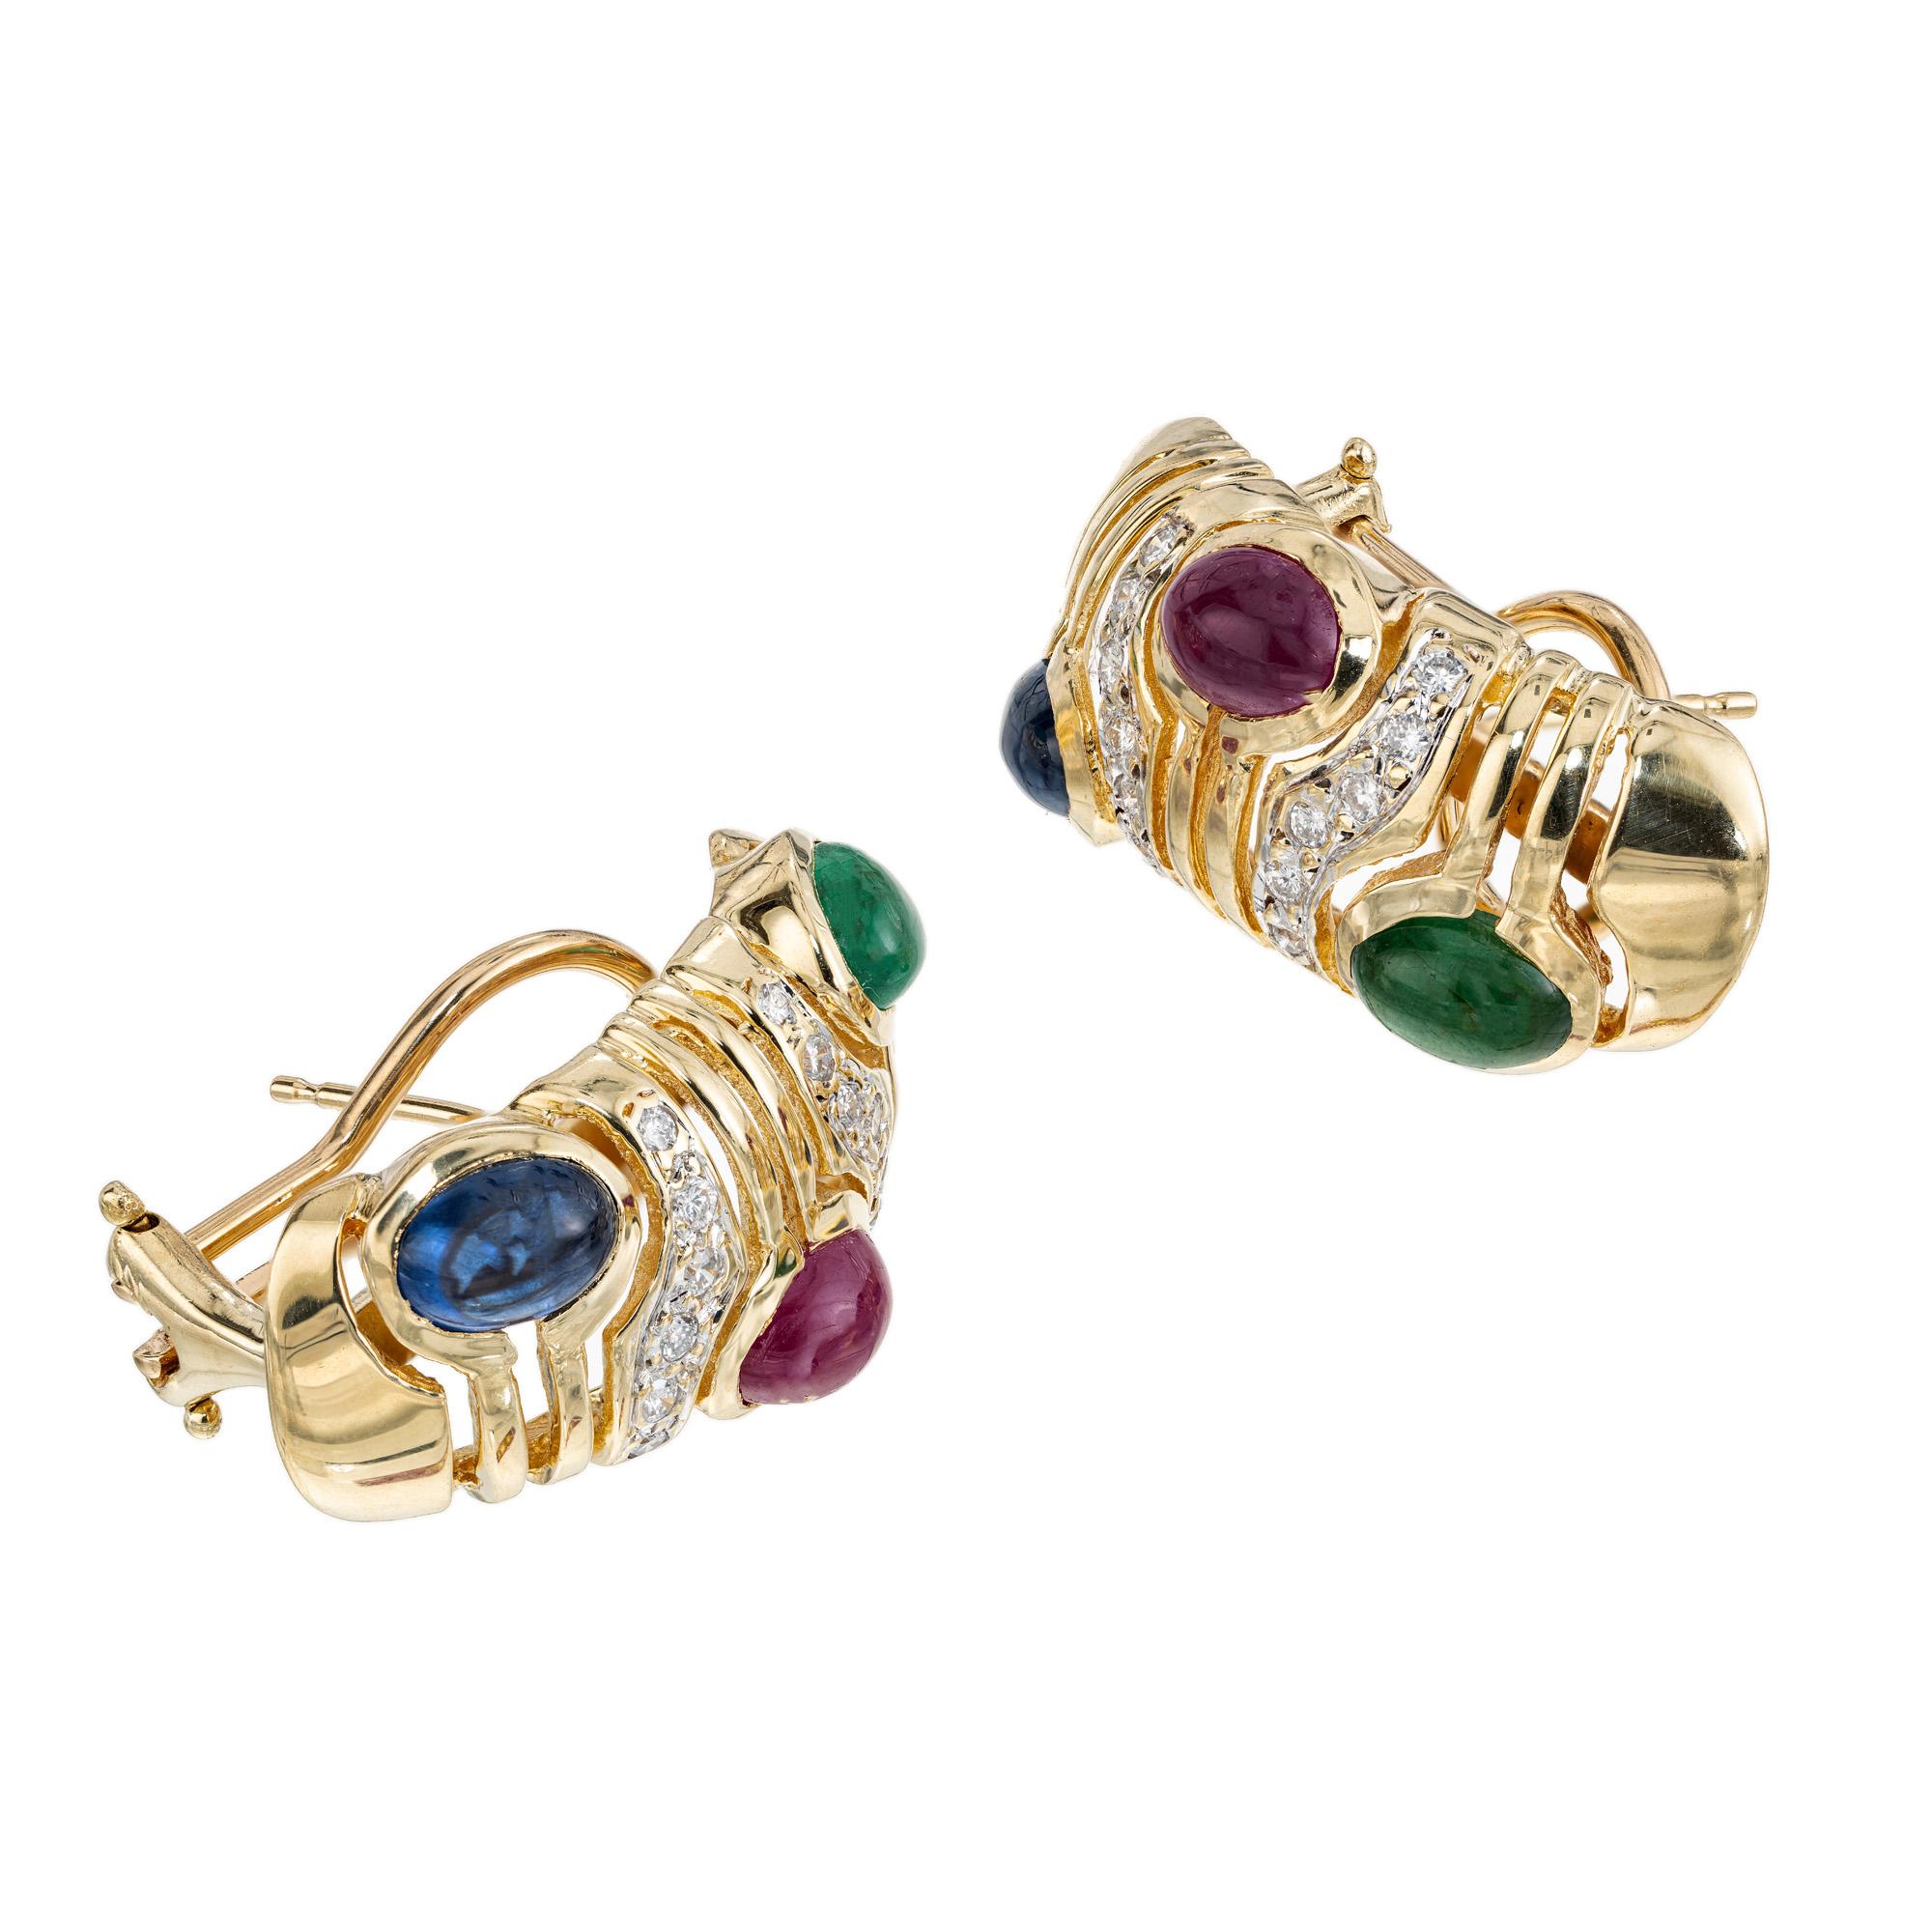 Vintage 1960's genuine sapphire and diamond earrings. Each cabochon earring is adorned with one cabochon Emerald, ruby and Sapphire gemstone. Set in 14k yellow gold, these clip post earrings are also accented 24 round cut diamonds. adding a